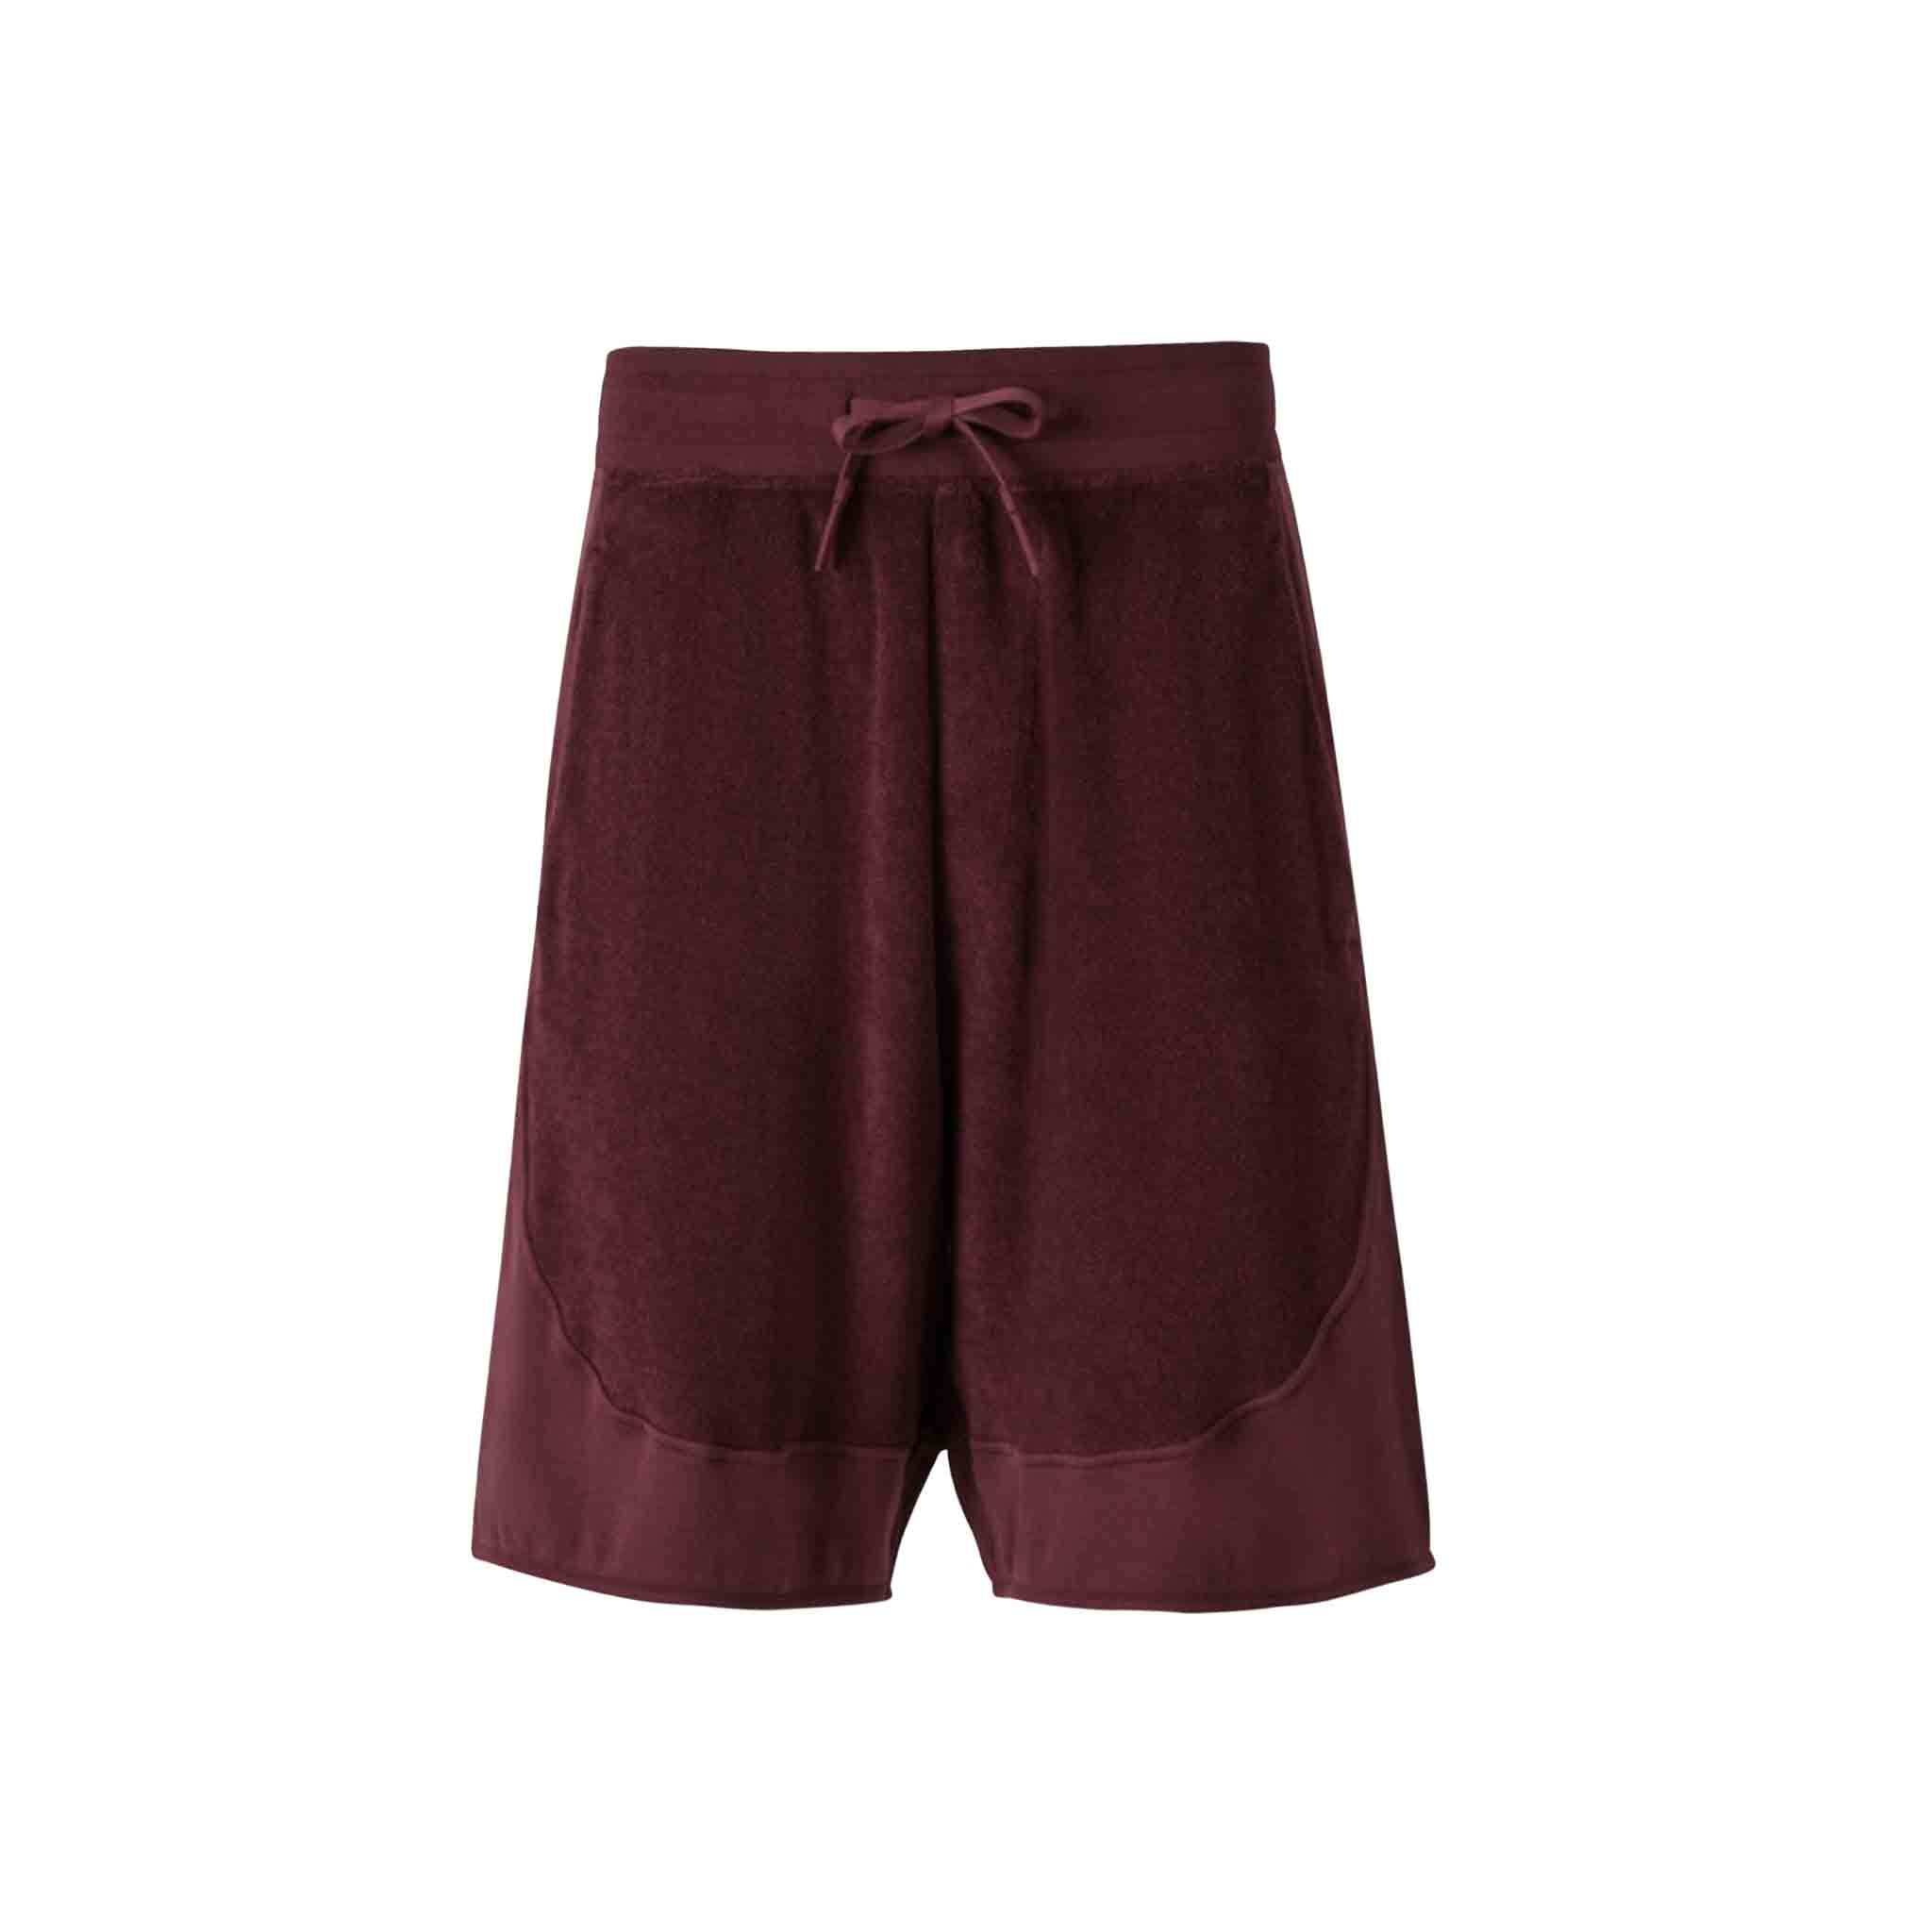 Stone Island Shadow Project Shorts Cotton Terry in Maroon